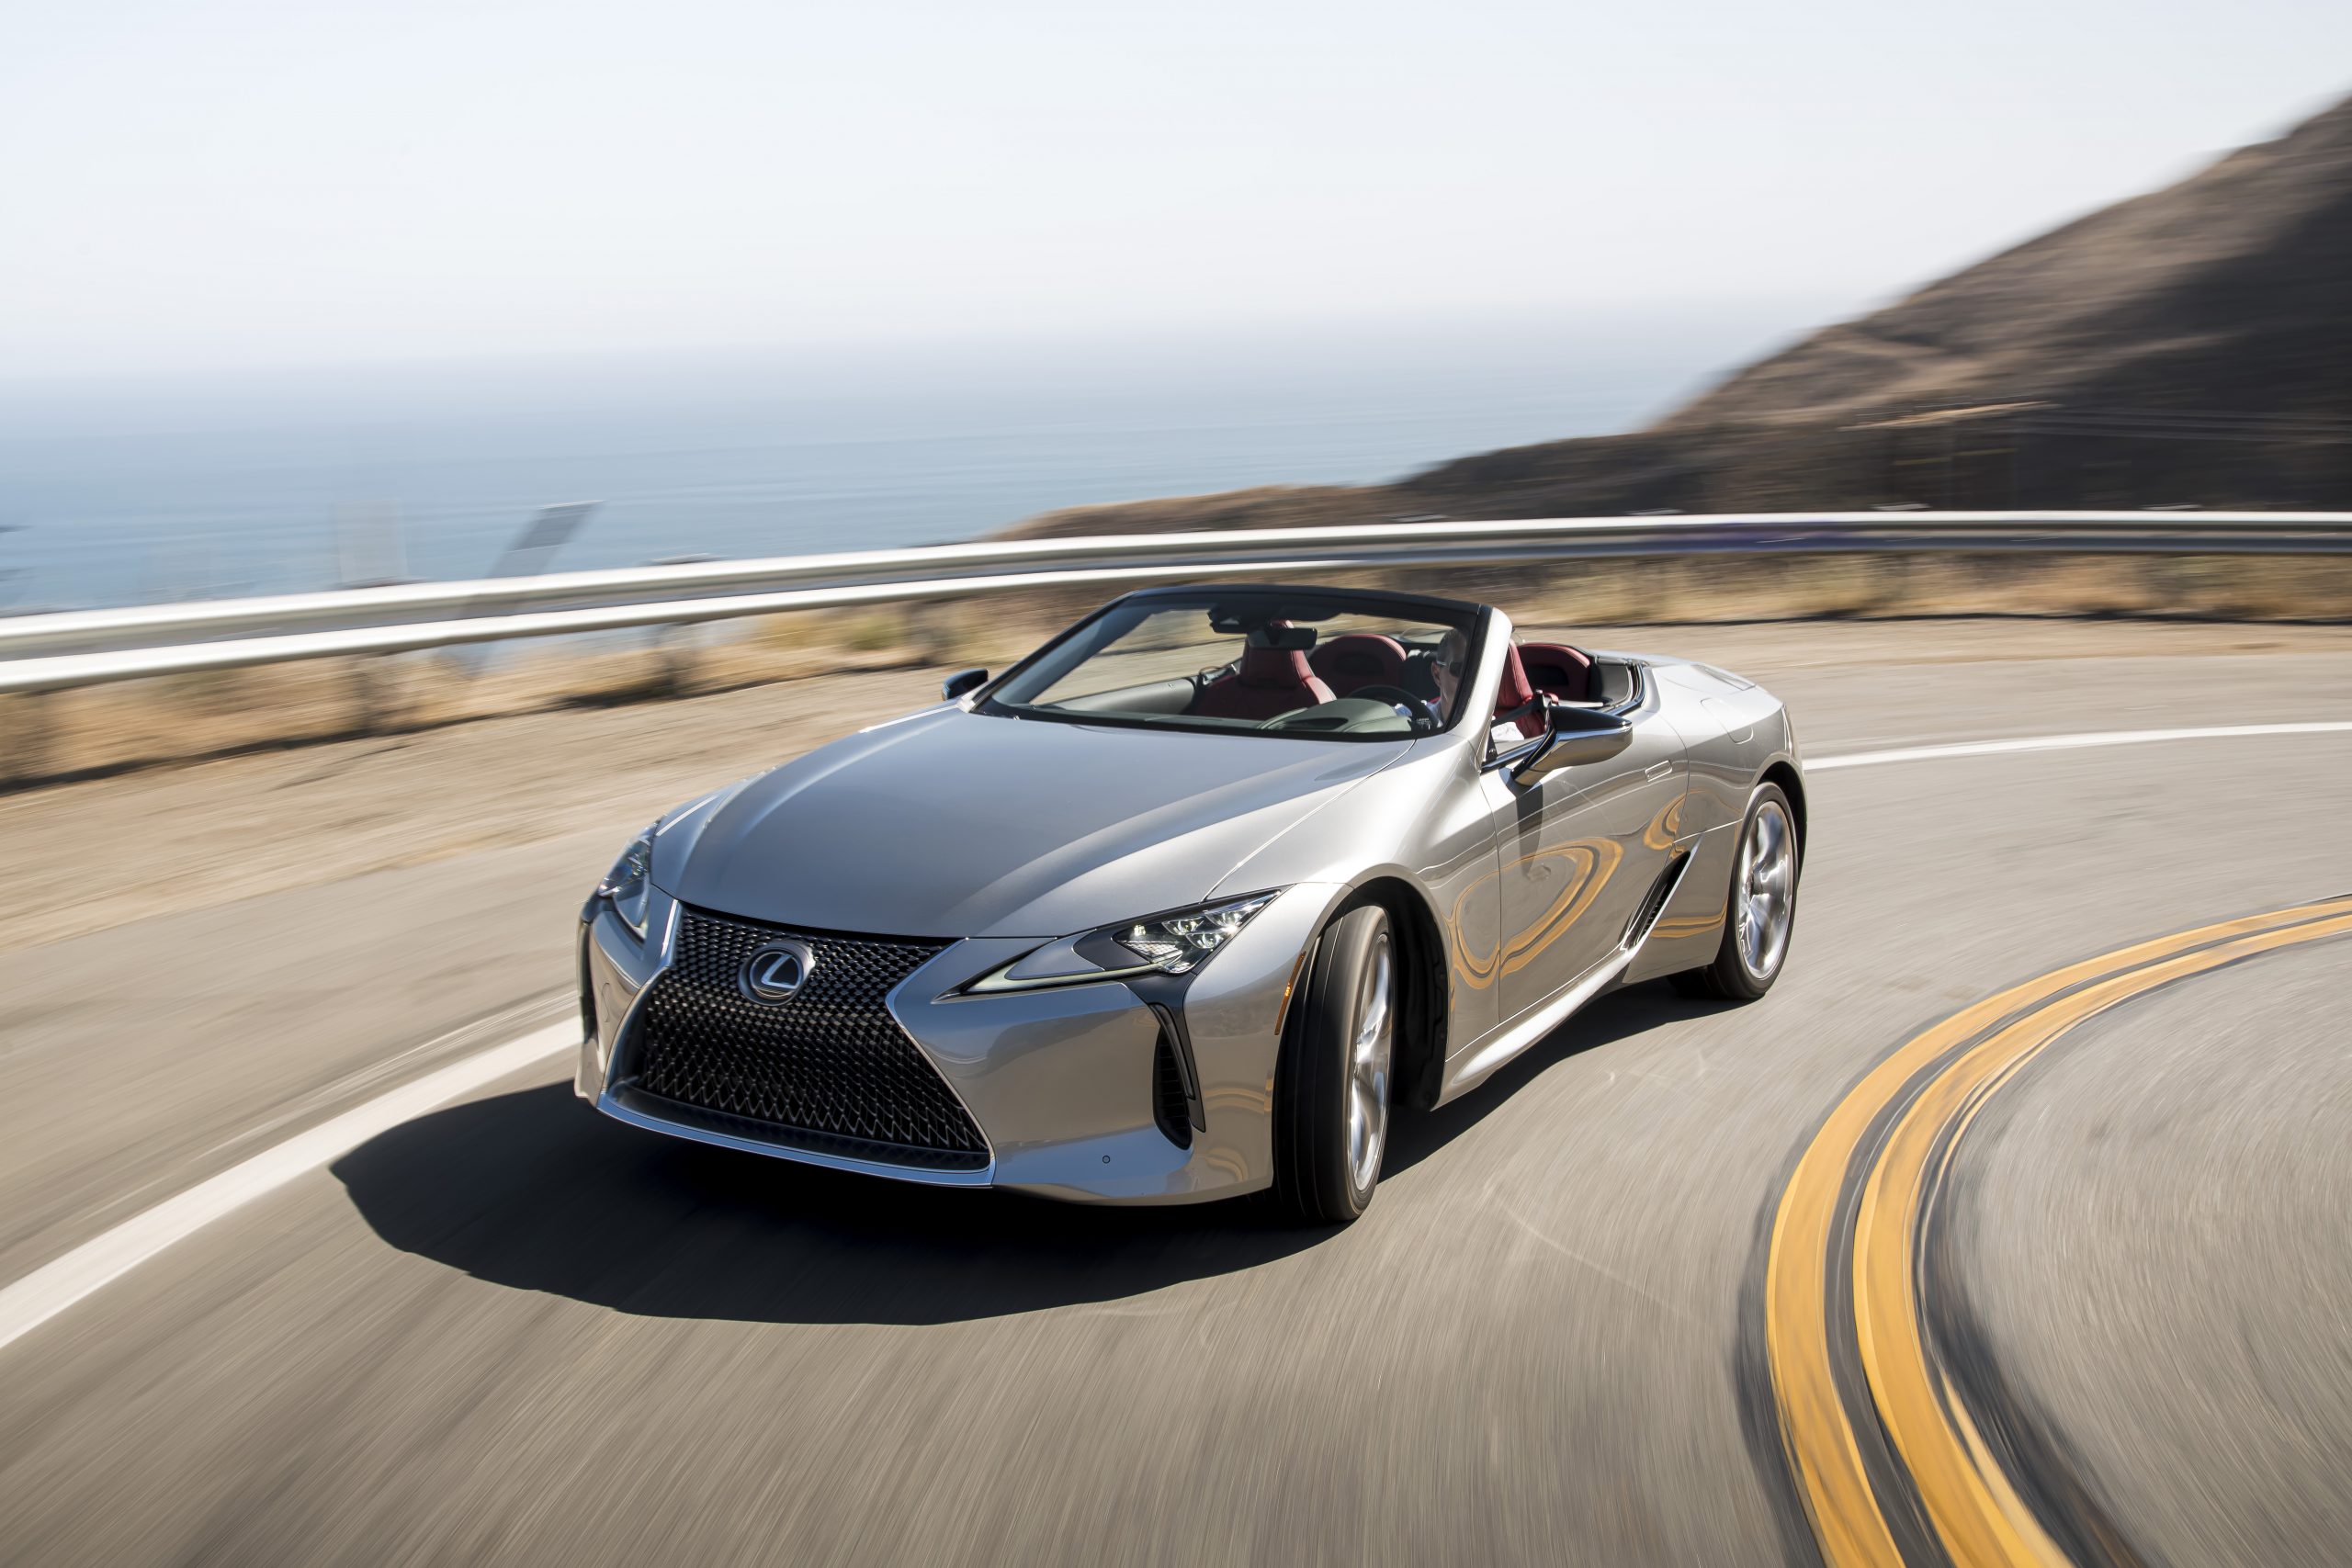 2021 Lexus LC 500 Convertible Opens Possibilities for Flagship Performance  - Lexus USA Newsroom